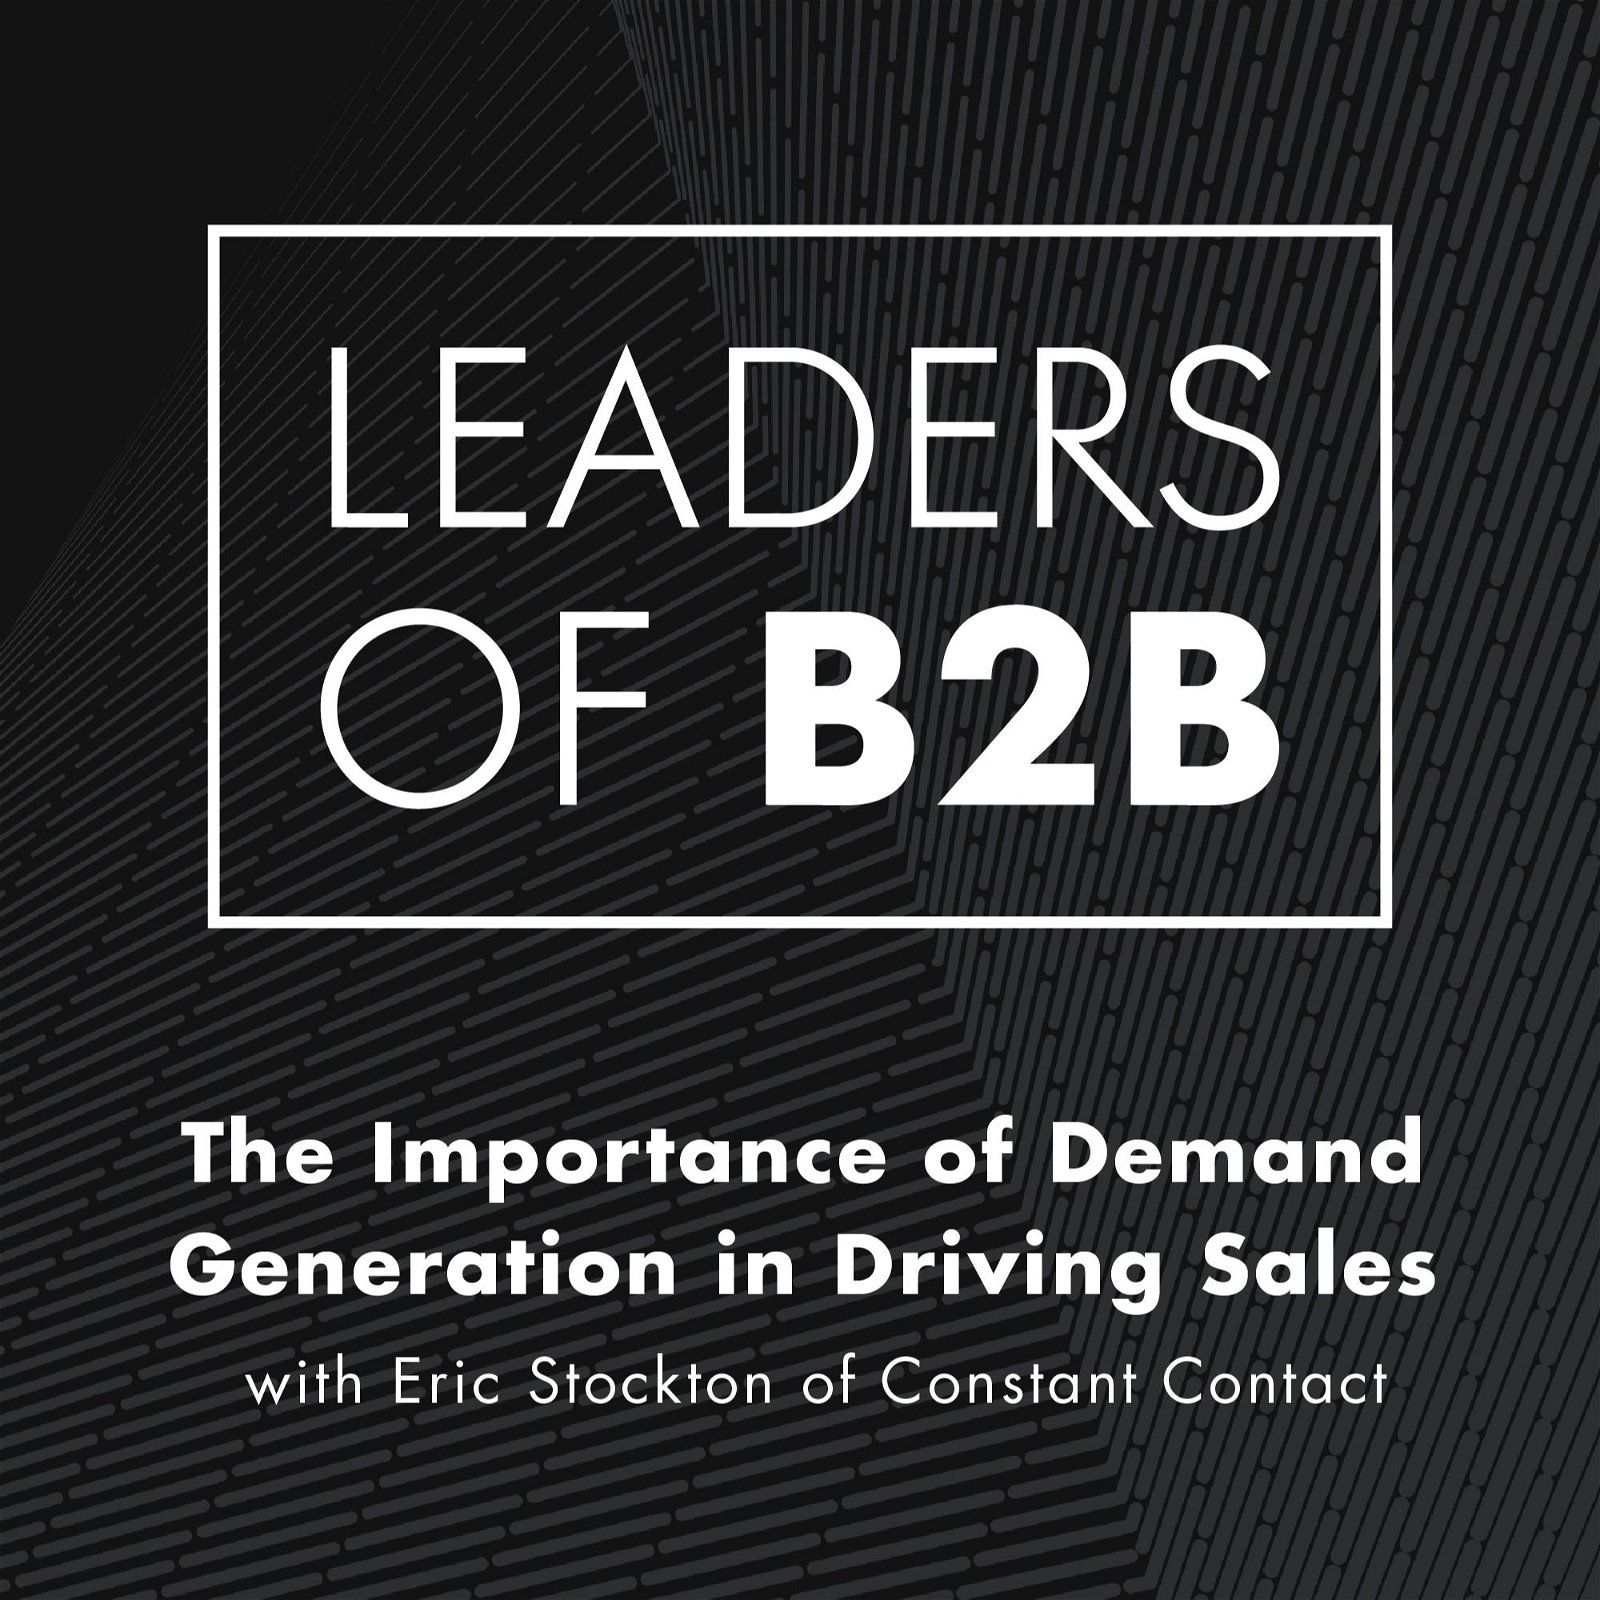 The Importance of Demand Generation in Driving Sales with Eric Stockton of Constant Contact